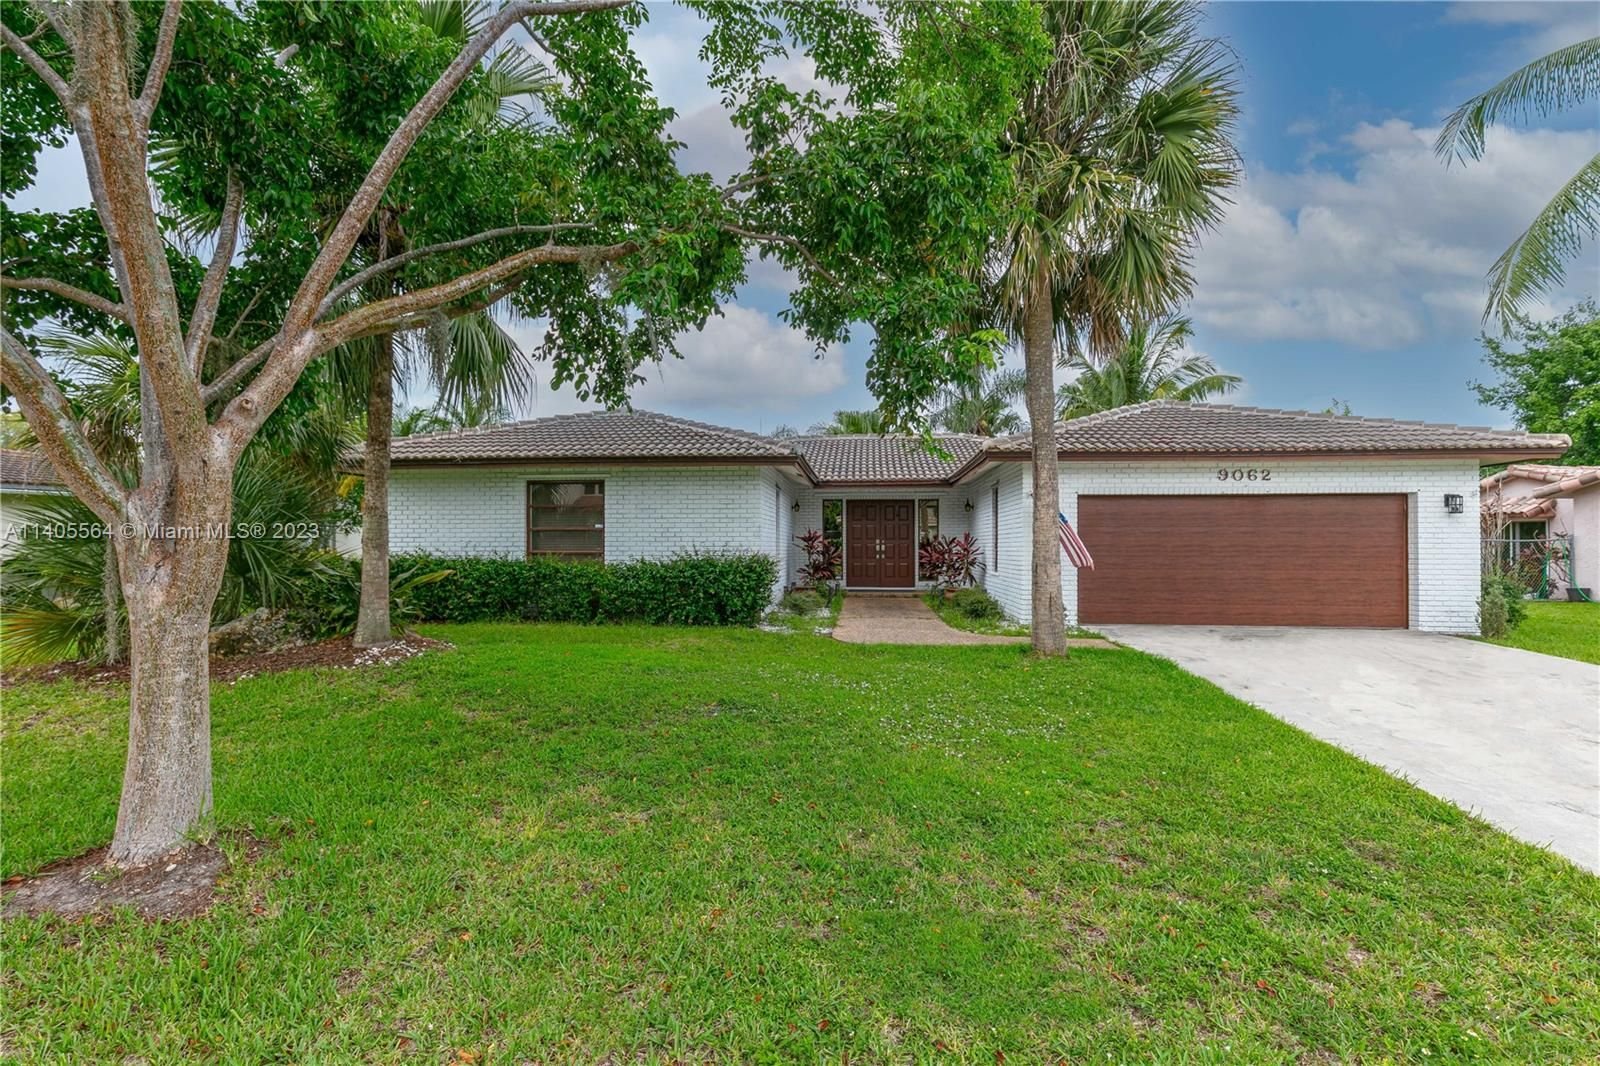 Real estate property located at 9062 20th Mnr, Broward County, Coral Springs, FL